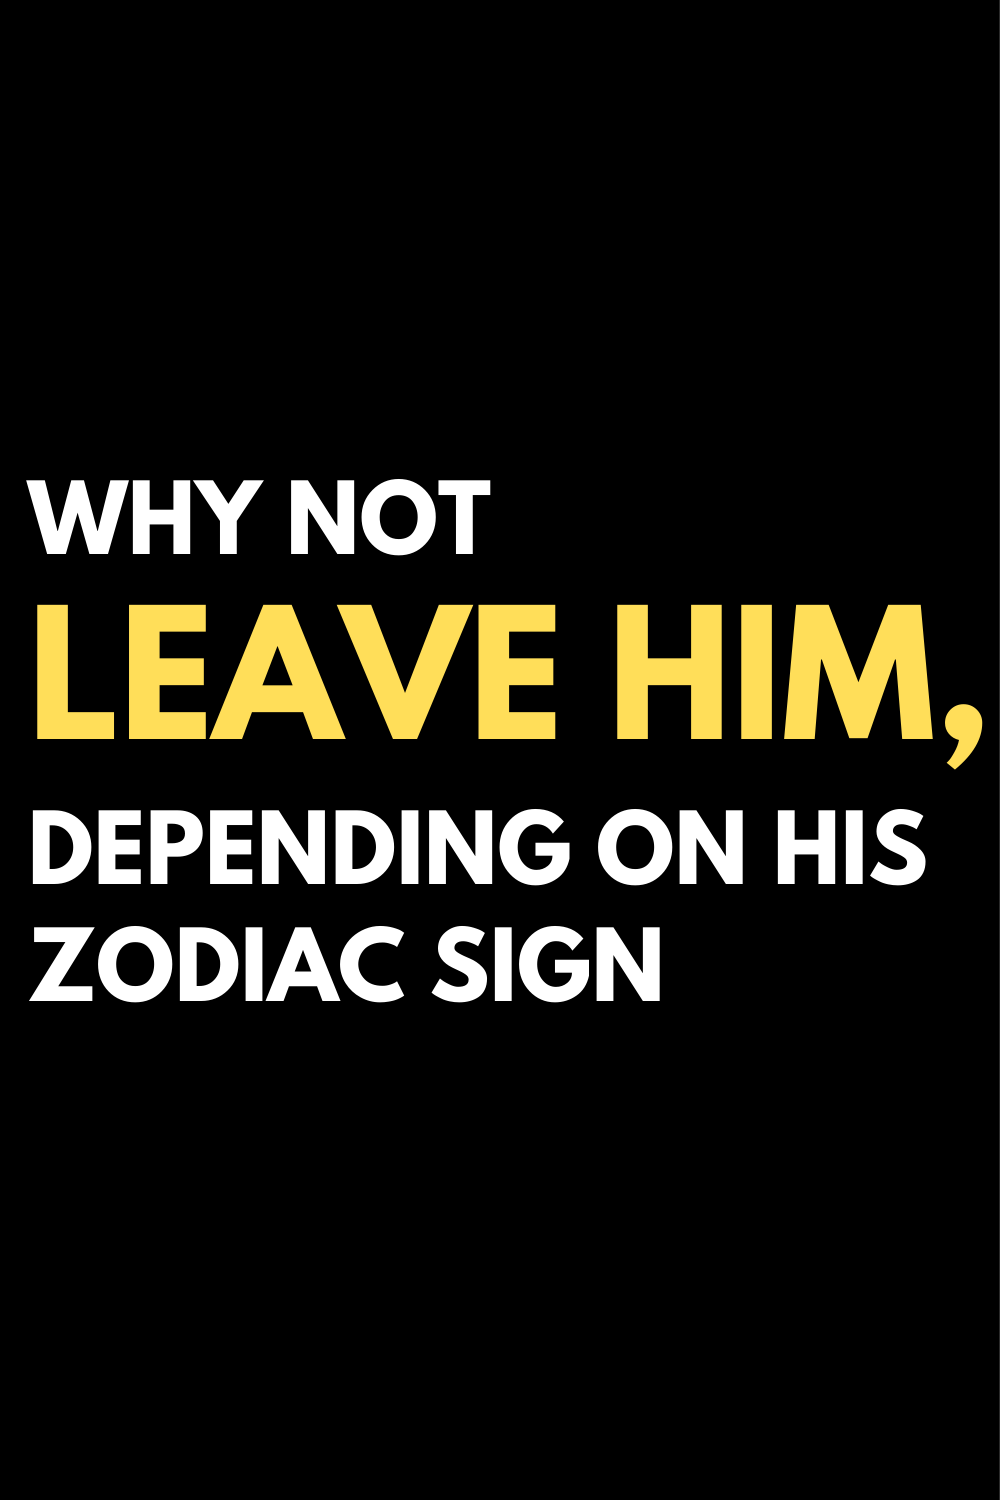 Why not leave him, depending on his zodiac sign